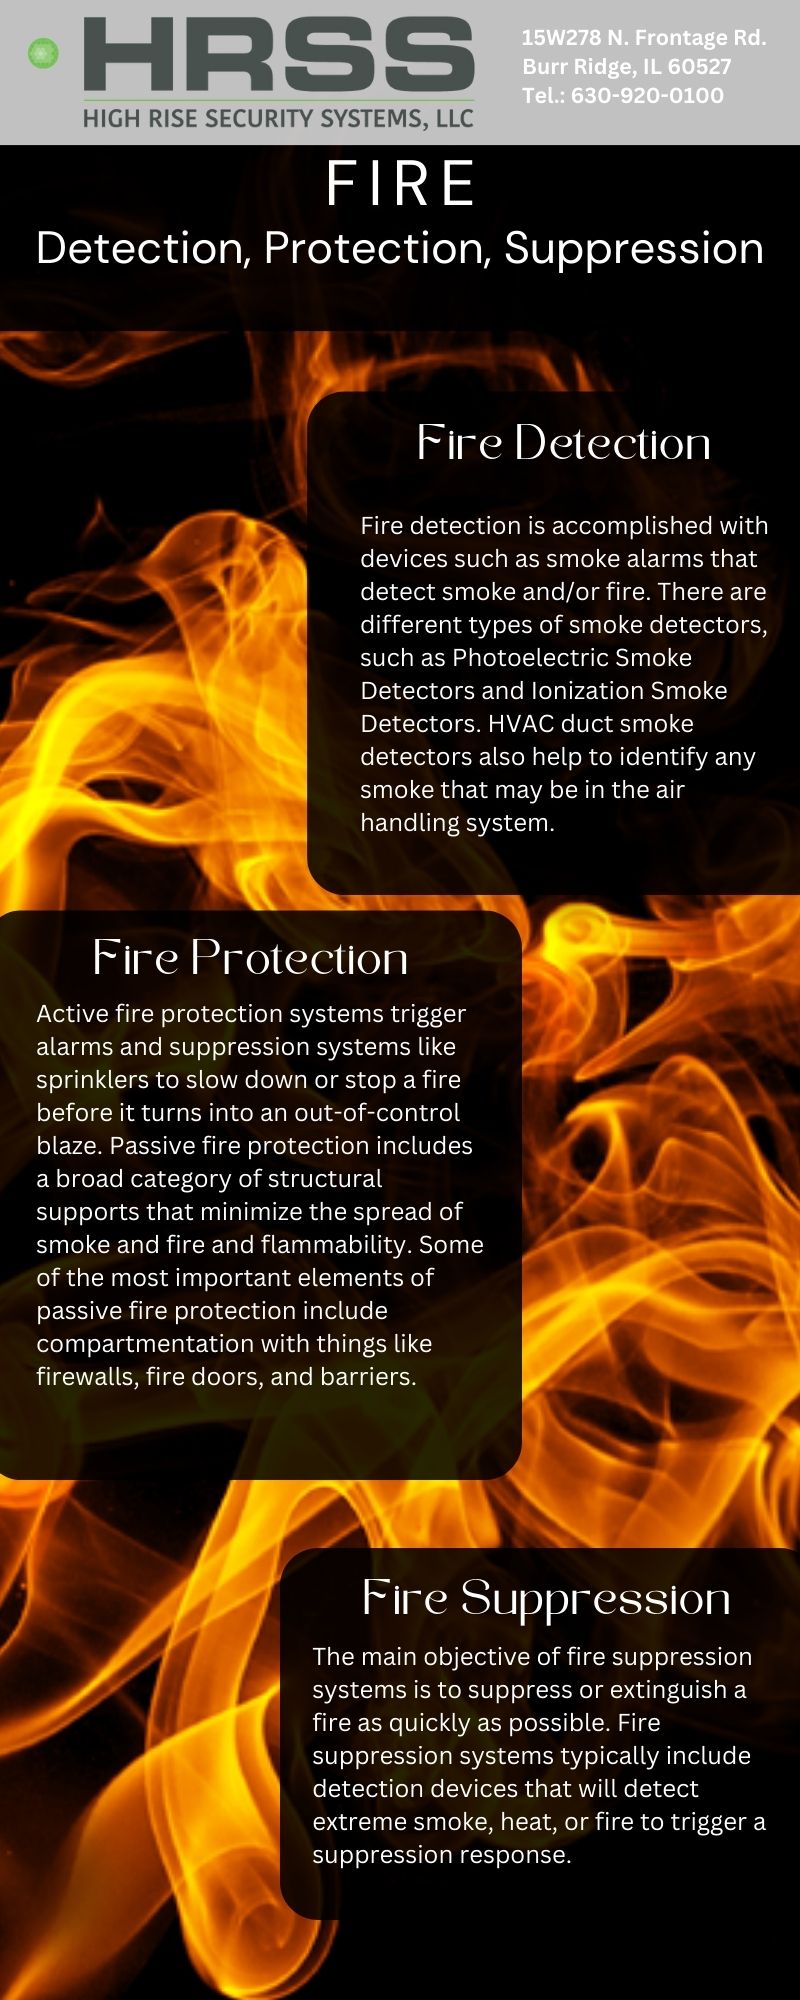 fire detection protection suppression infographic